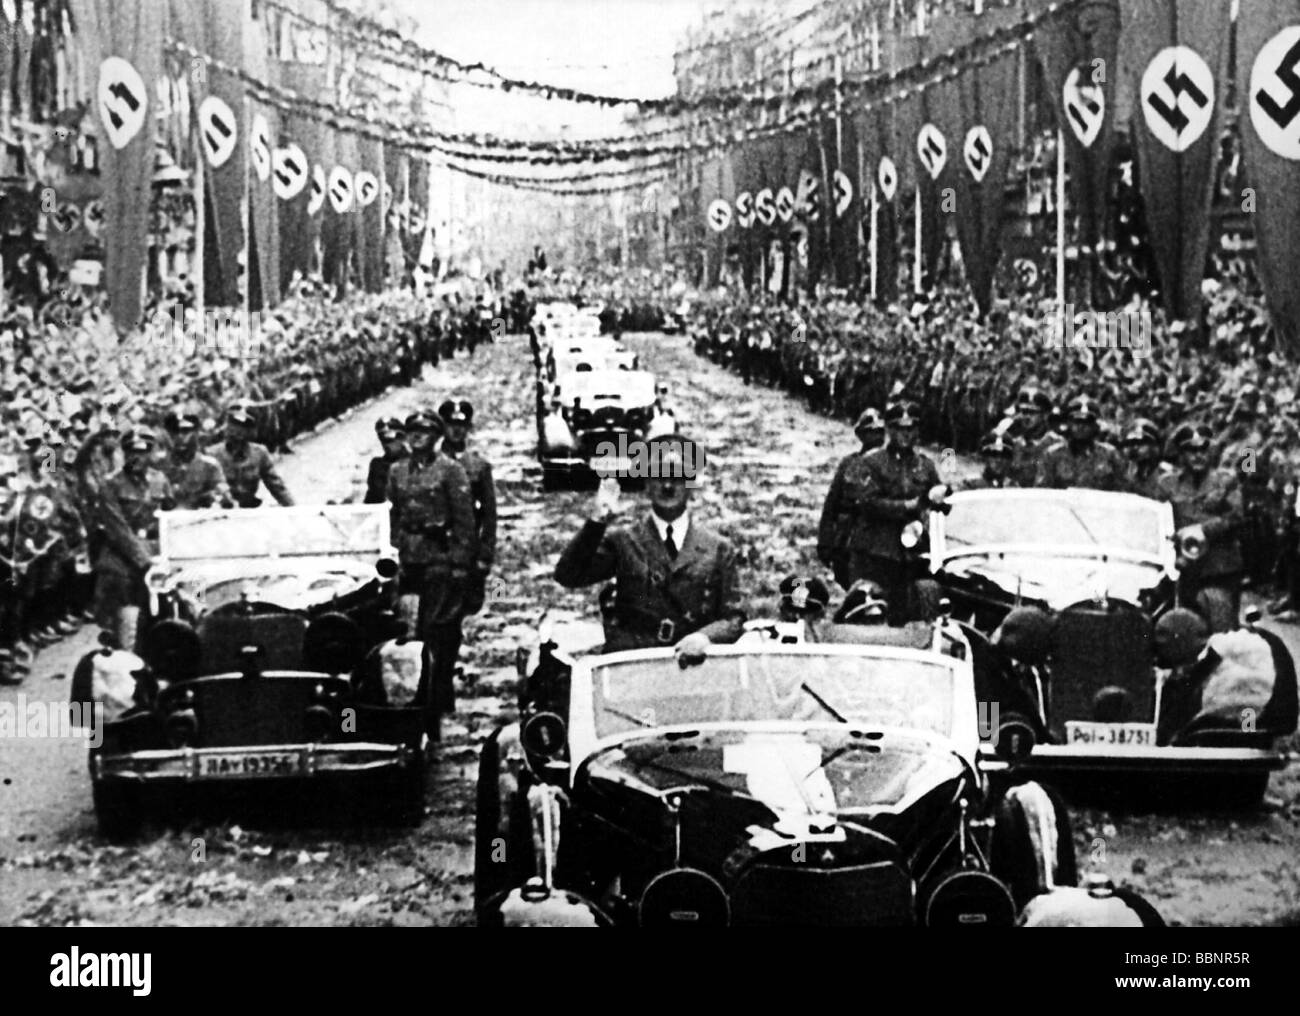 Hitler, Adolf, 20.4.1889 - 30.4.1945, German politician (NSDAP), Fuehrer and Reich Chancellor since 1933, half length, in open-topped car, probably during Nuremberg Rally, 1930s, Stock Photo